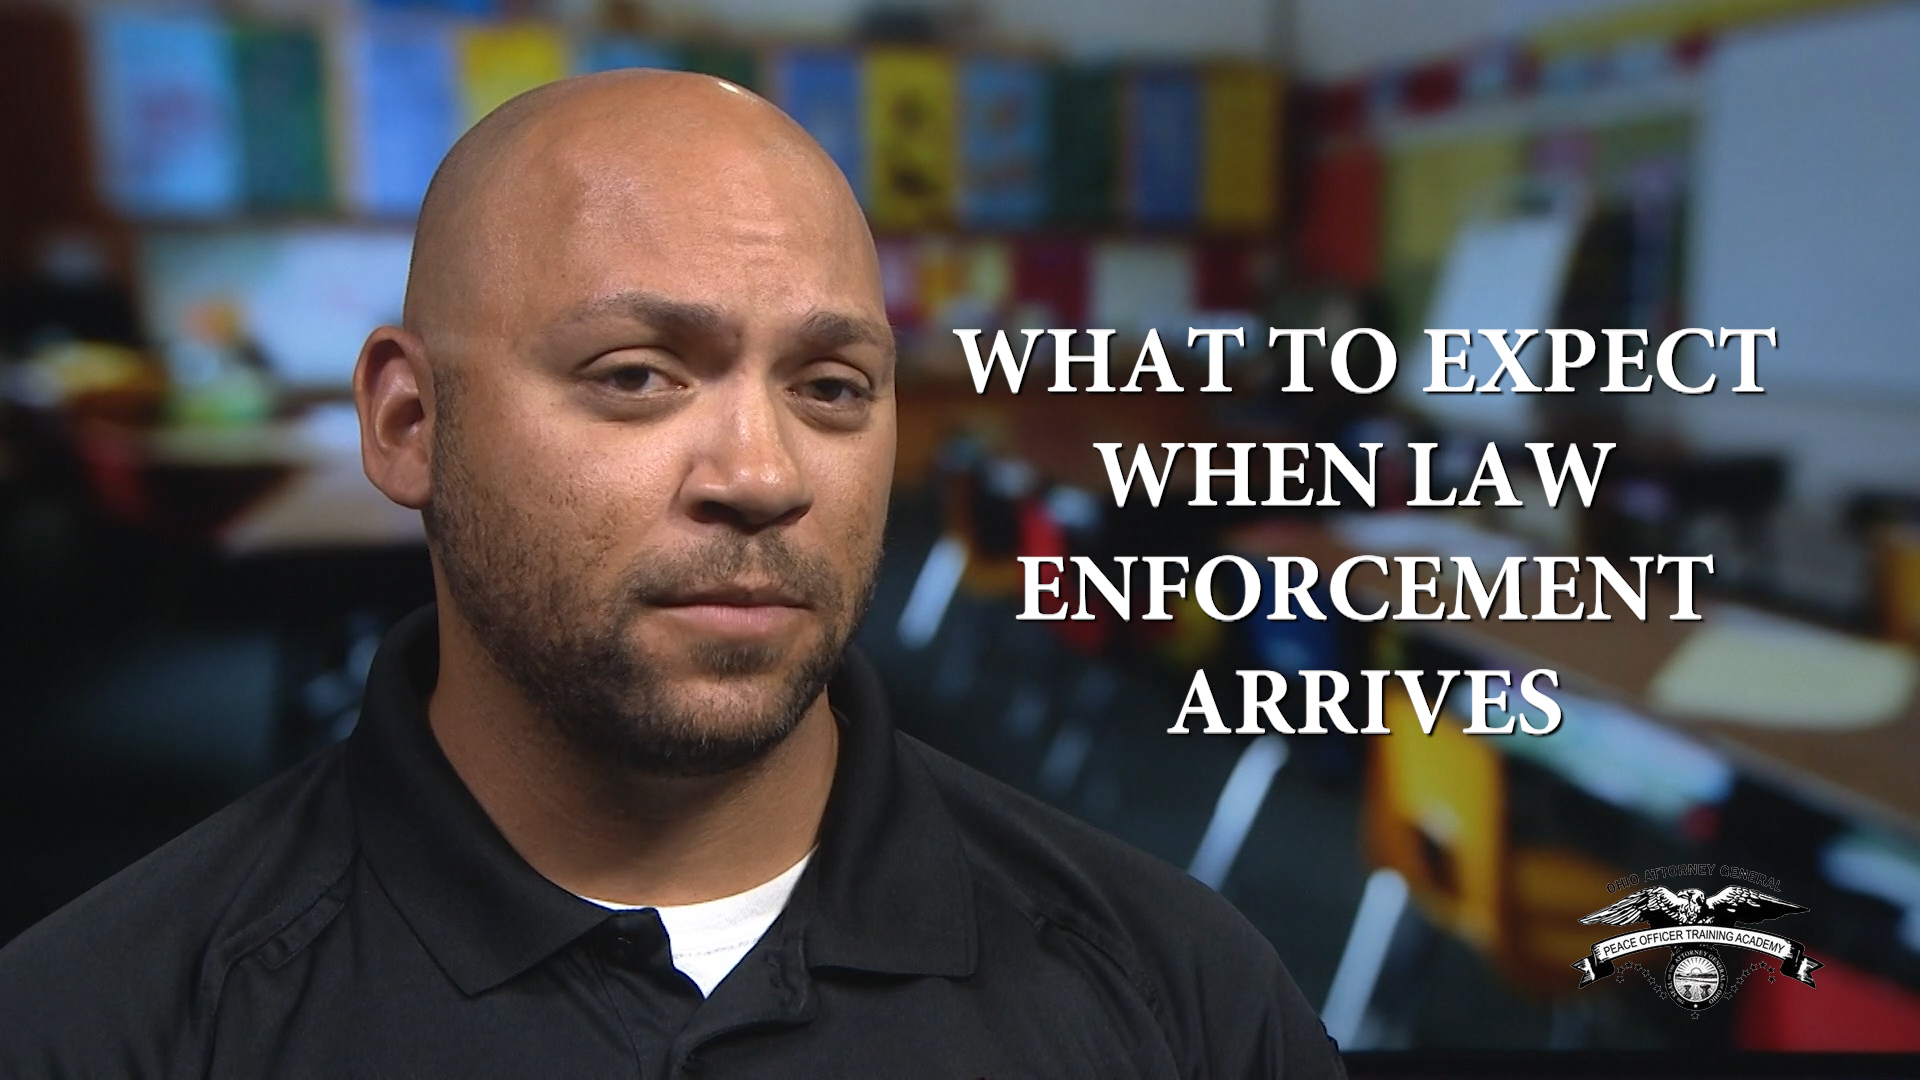 Video 14: What to Expect When Law Enforcement Arrives